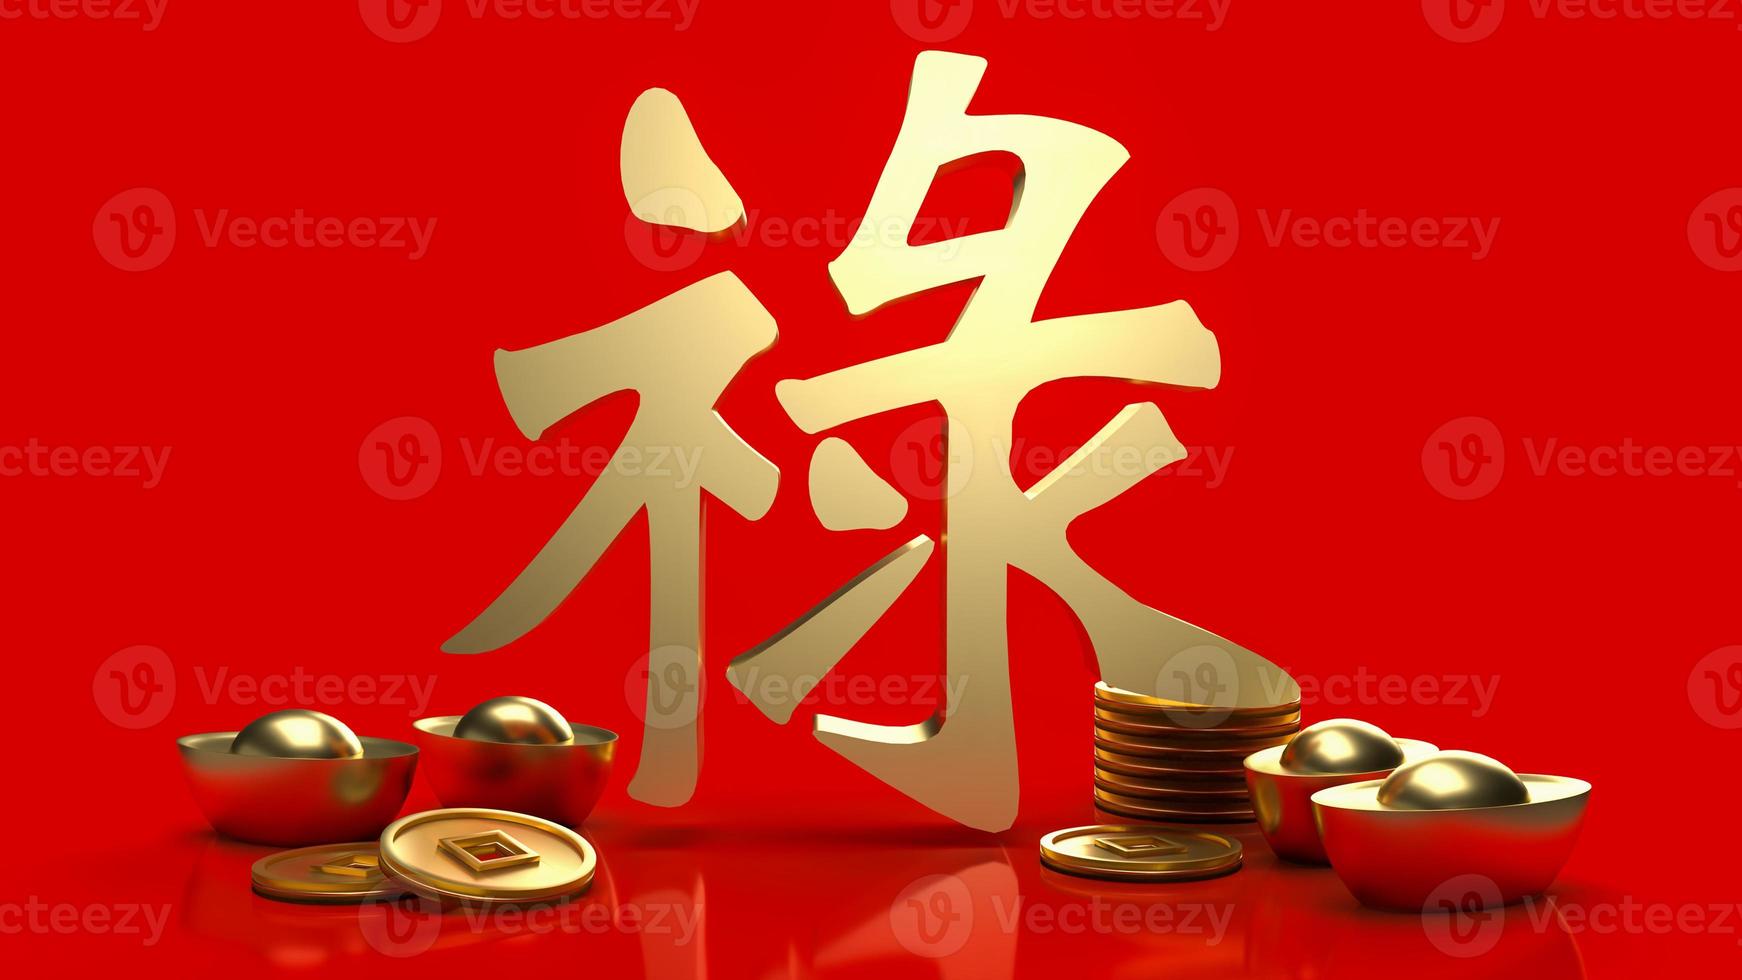 The gold money and  Chinese  lucky text   lu  meanings  is good luck, wealth, and long life for celebration   or new year concept  3d rendering photo